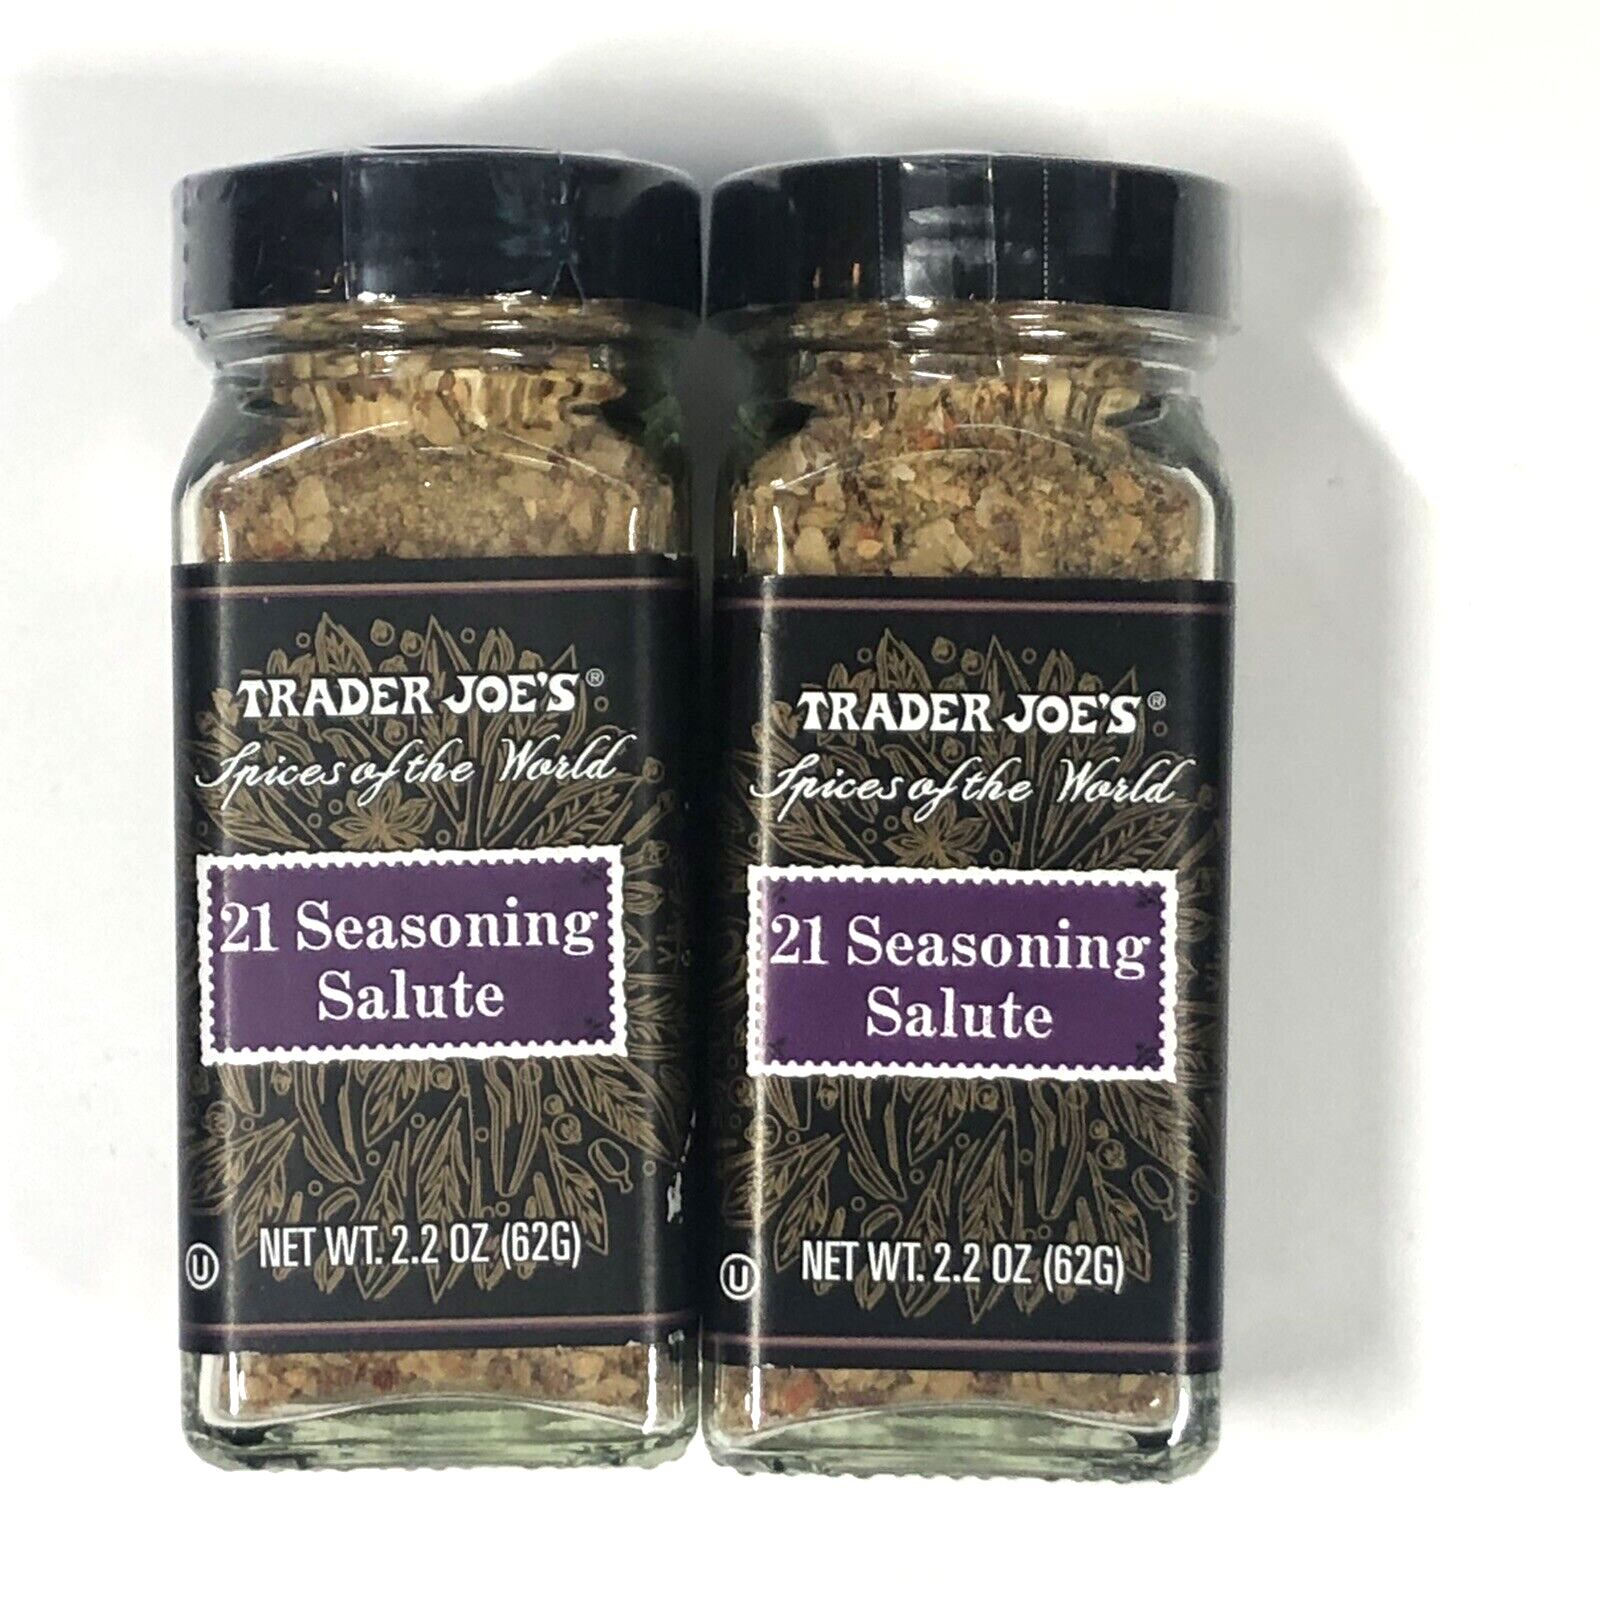 Primary image for 2x Trader Joe's Spices of the World 21 Seasoning Salute 2.2 oz each 01/2025